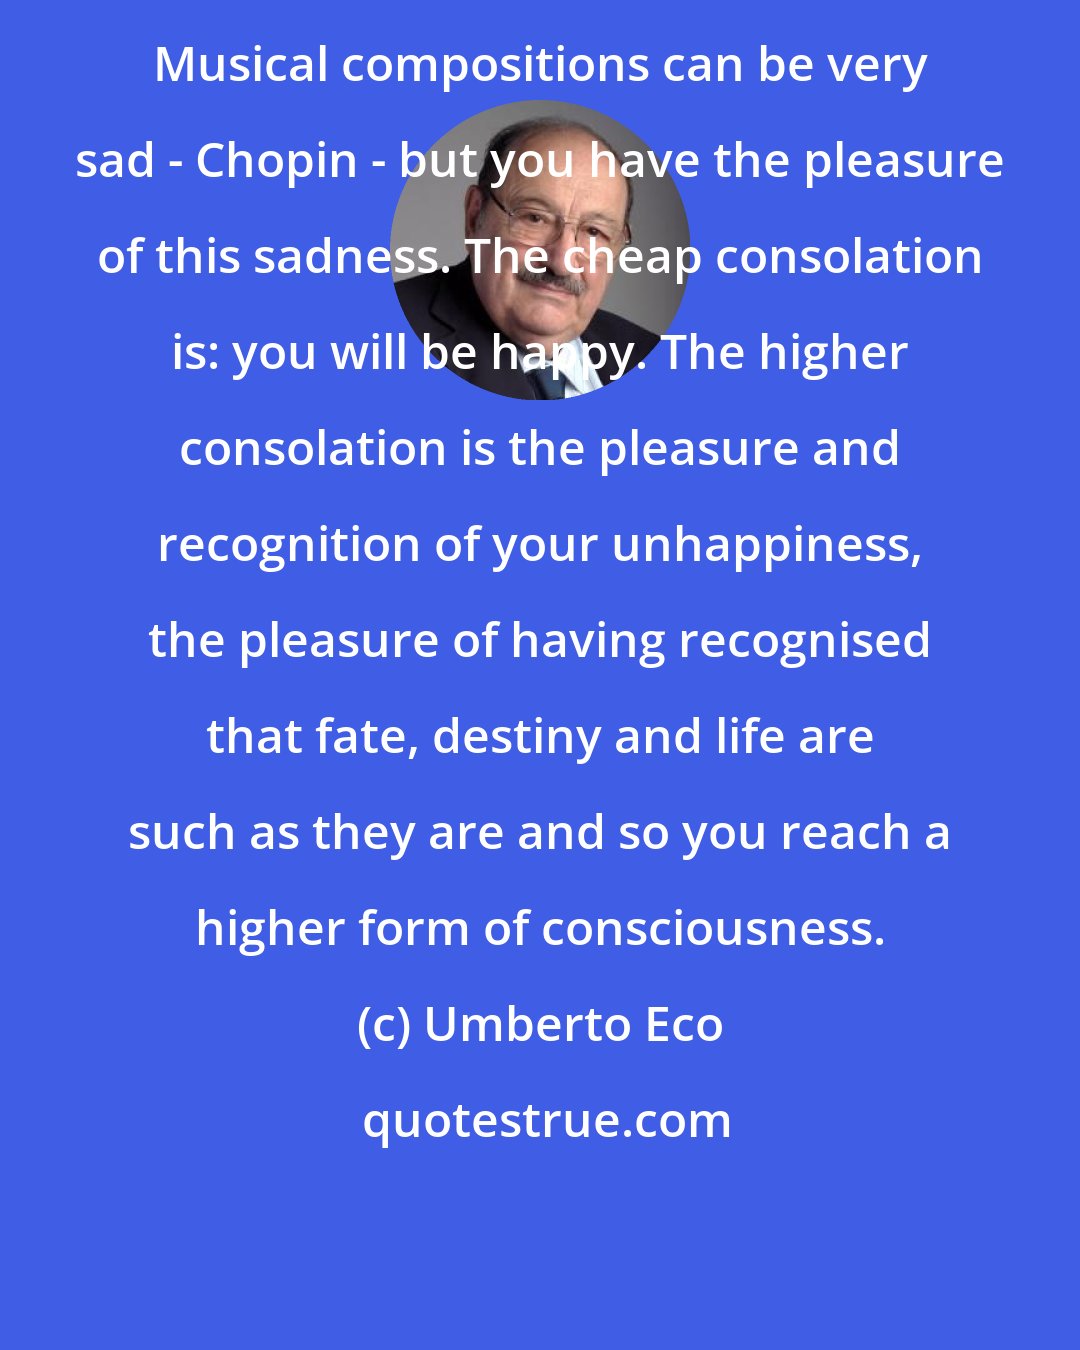 Umberto Eco: Musical compositions can be very sad - Chopin - but you have the pleasure of this sadness. The cheap consolation is: you will be happy. The higher consolation is the pleasure and recognition of your unhappiness, the pleasure of having recognised that fate, destiny and life are such as they are and so you reach a higher form of consciousness.